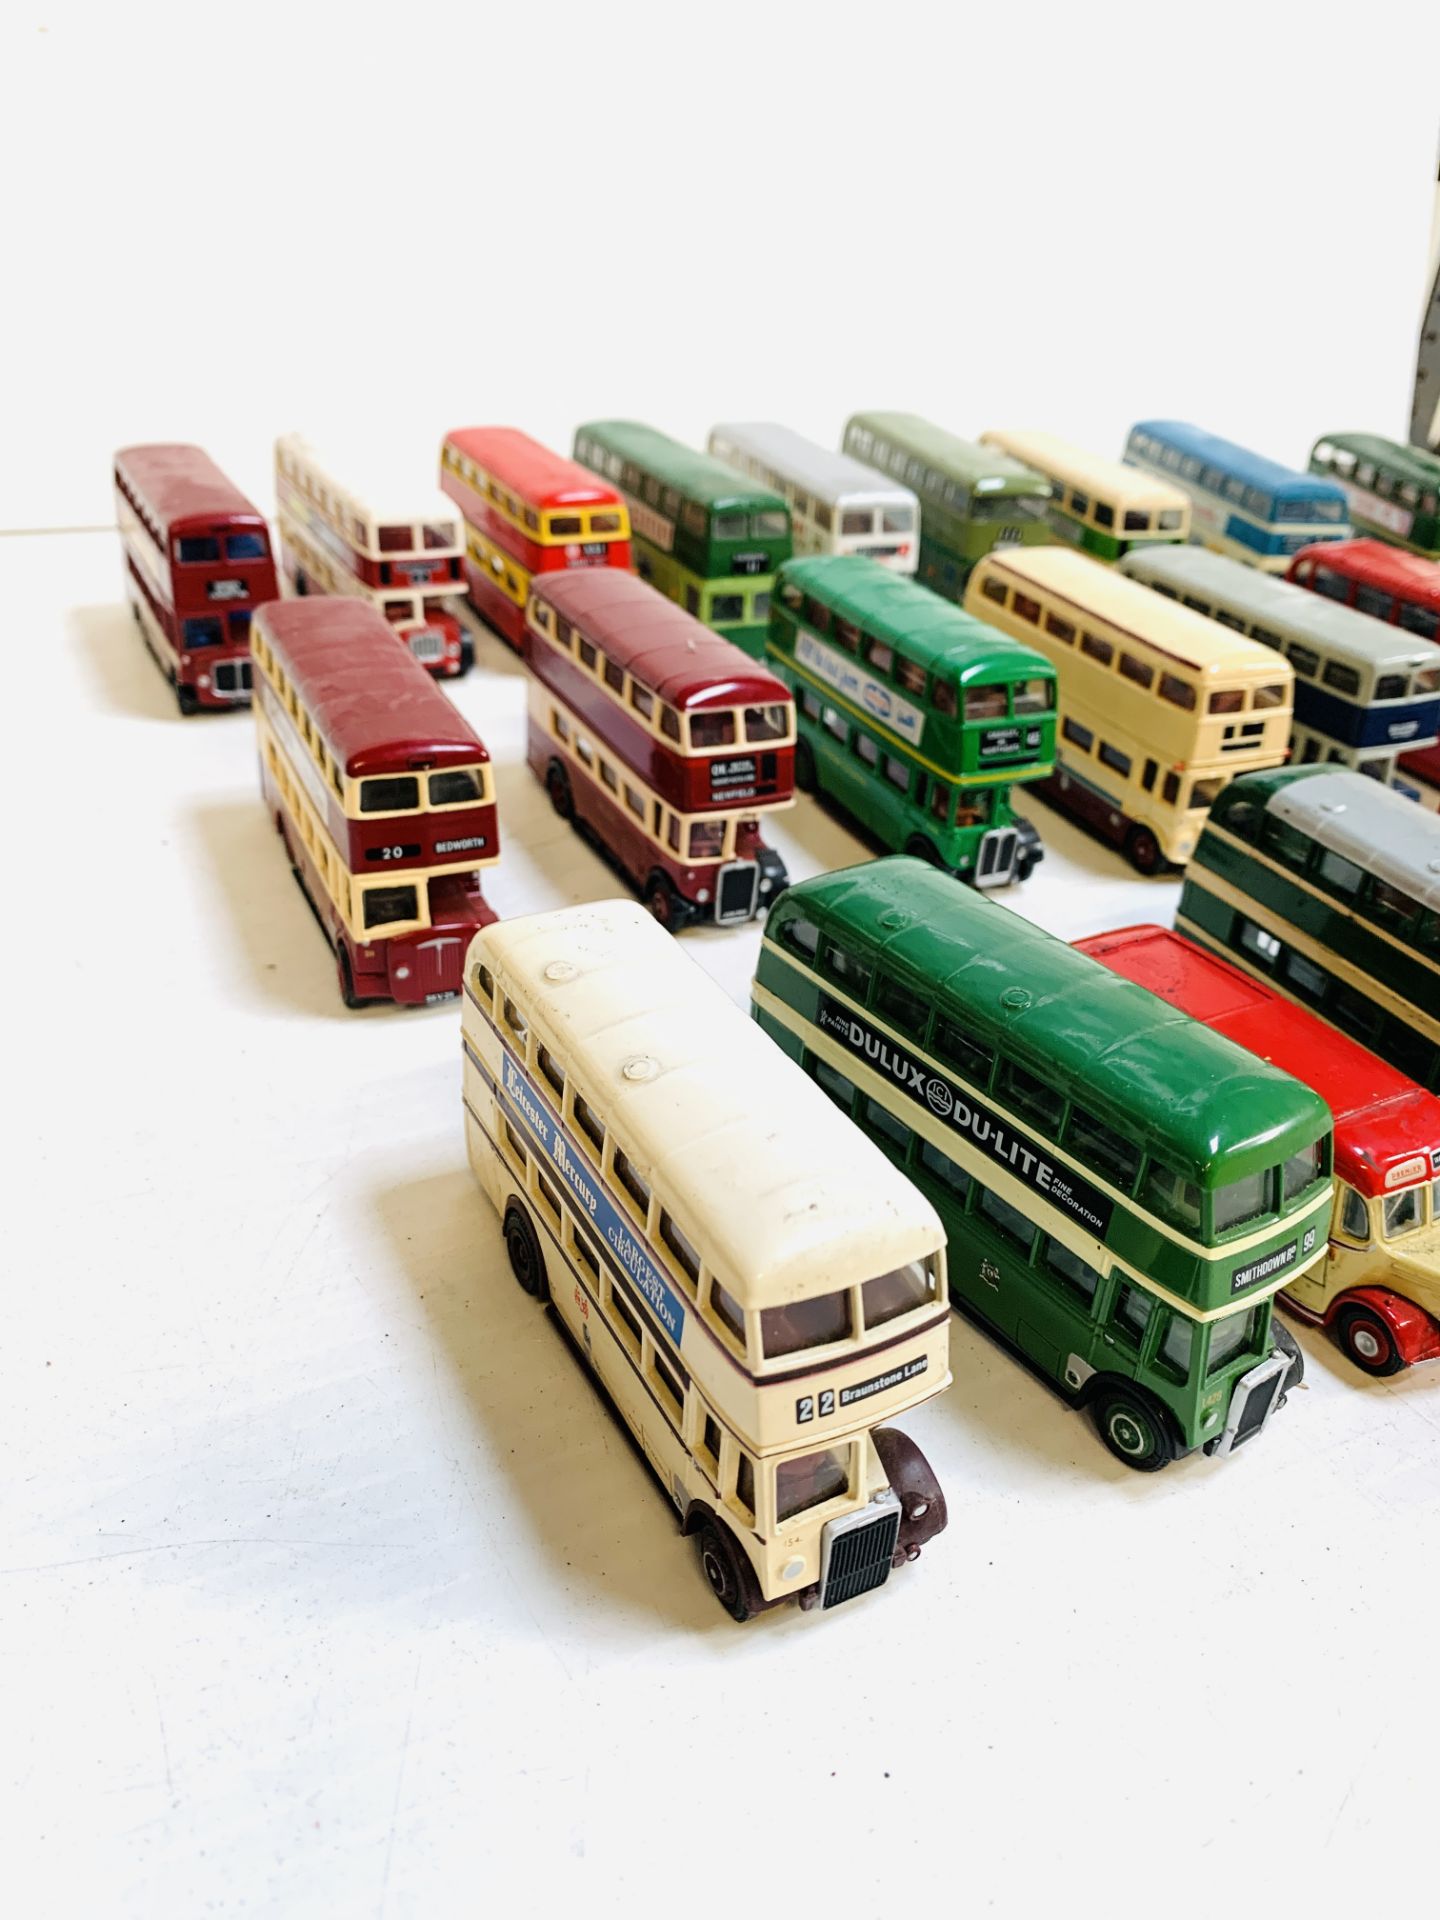 Twenty-two die-cast model double-decker buses; a Solido model car; and a steam traction engine. - Image 3 of 6